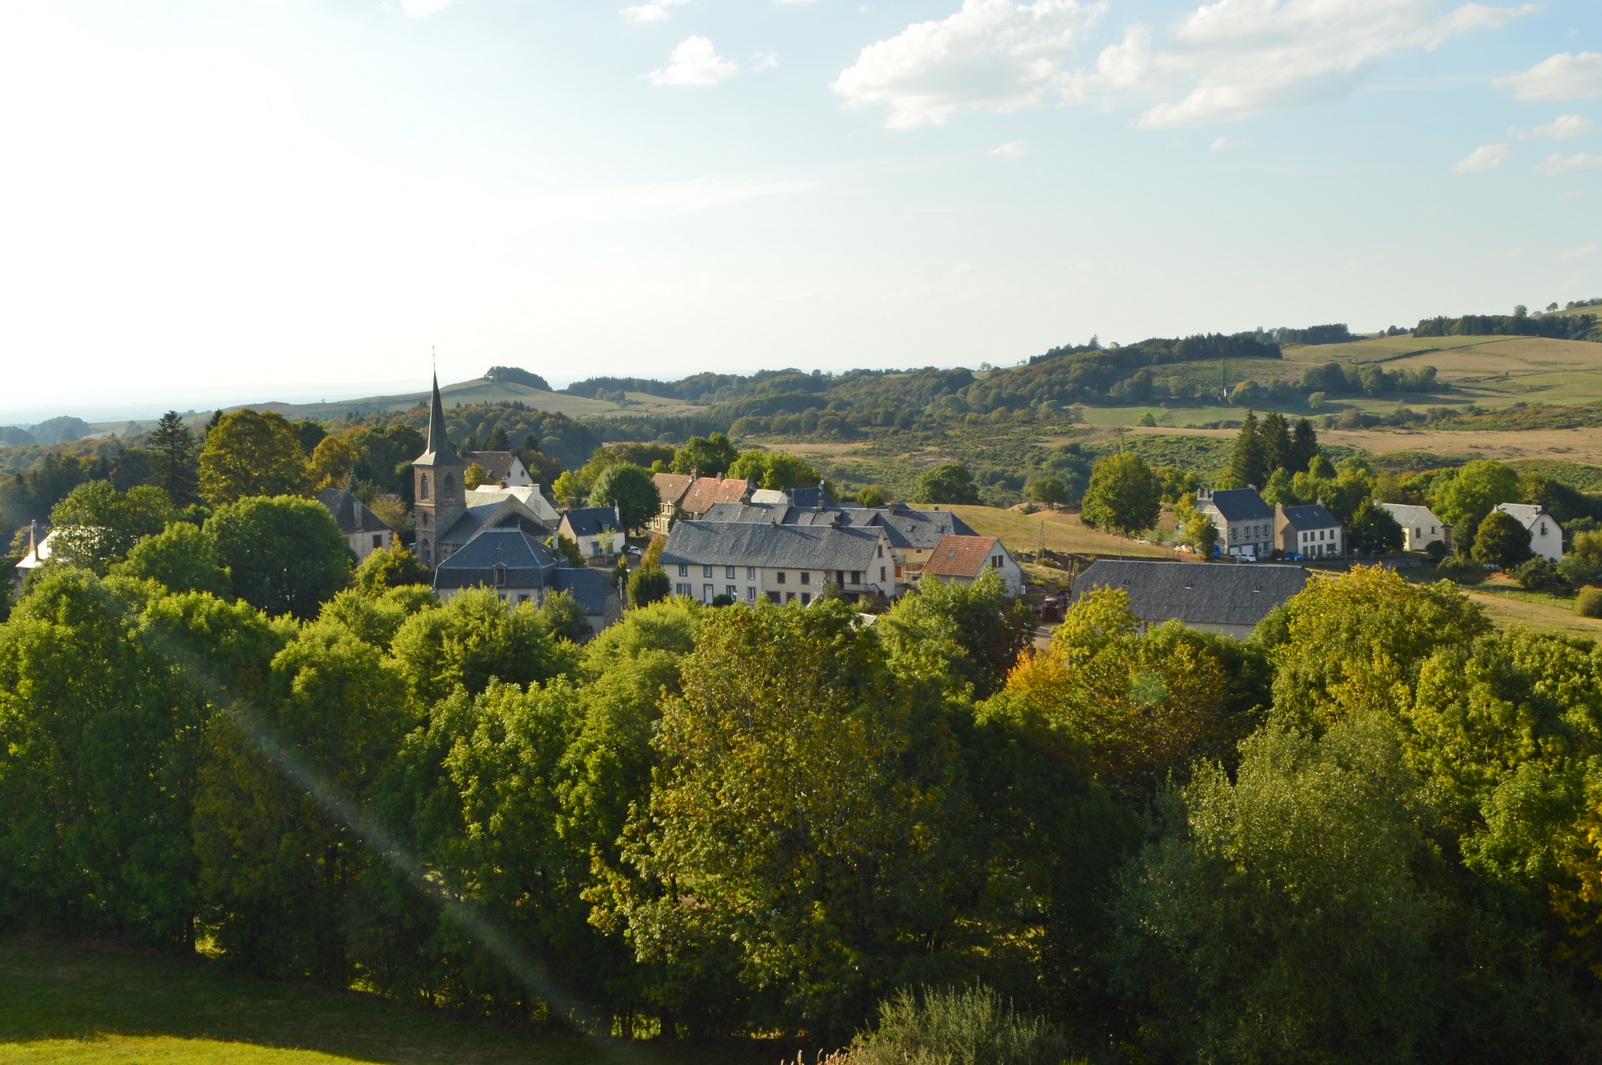 View of the village of Saint-Donat from the statue of Our Lady of Fatima